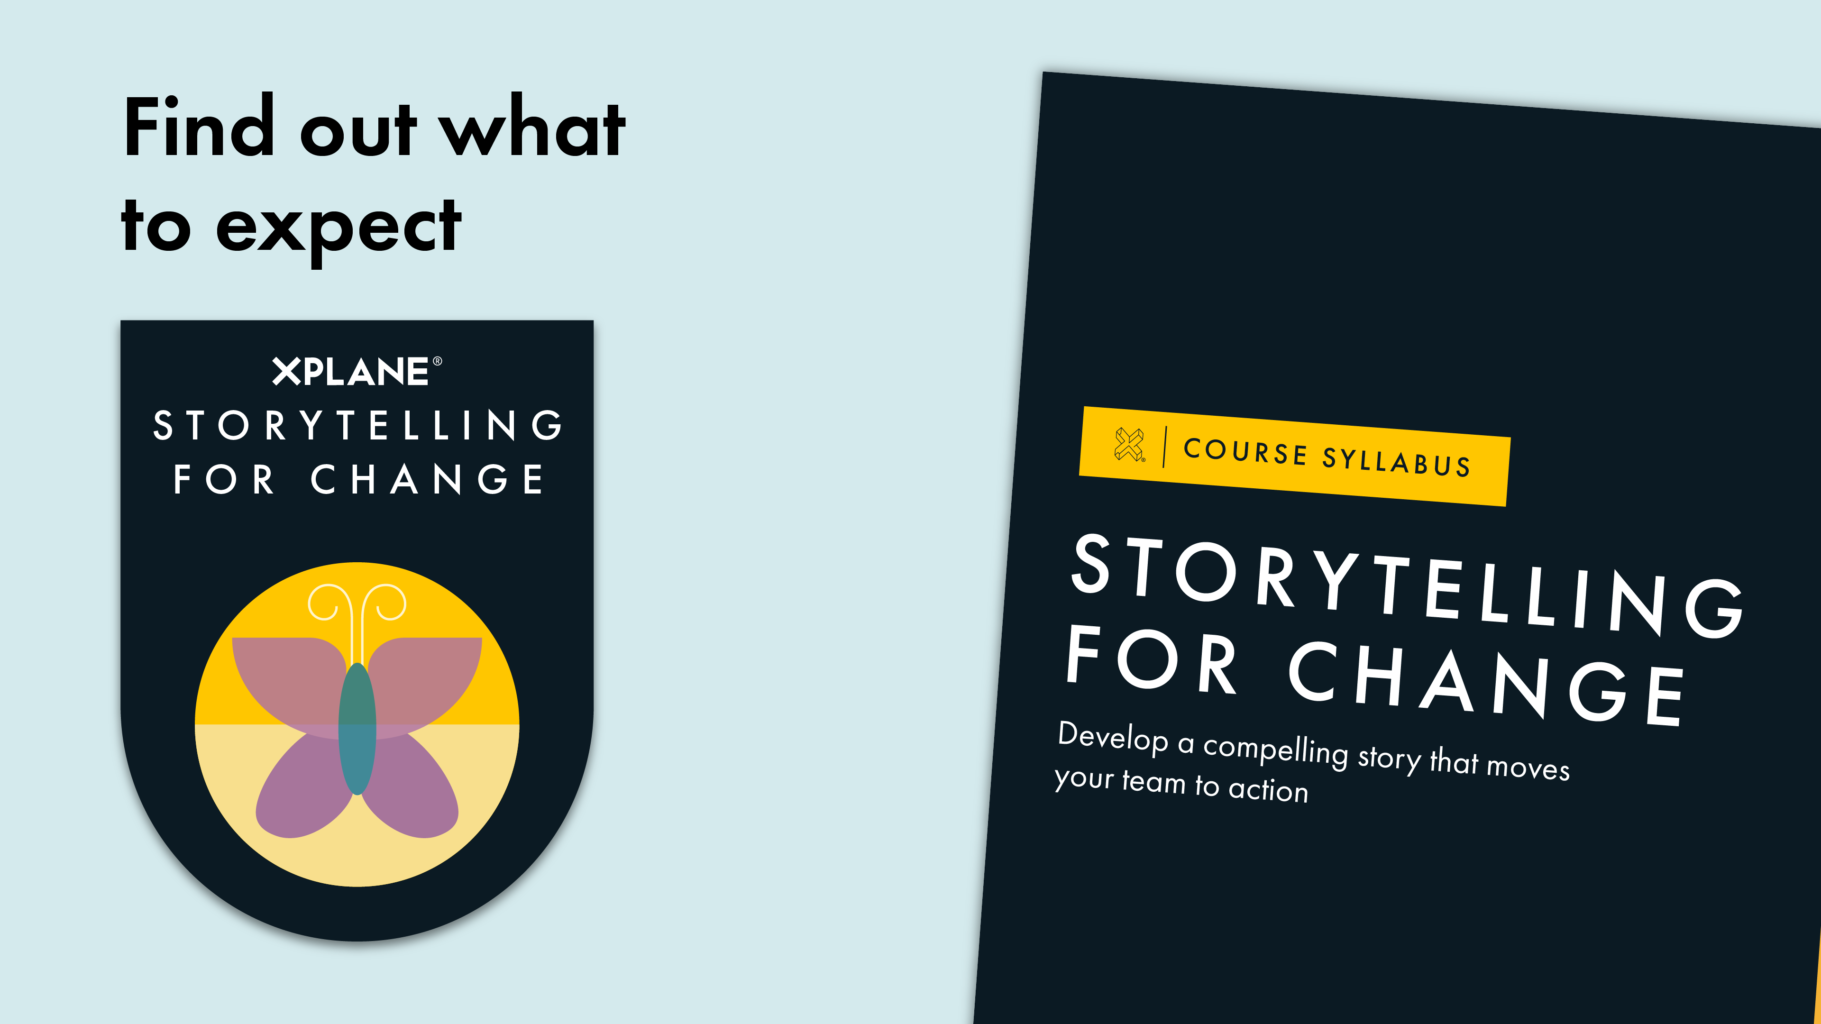 Image of the Storytelling for Change course syllabus peeks from the right next to text reading "Find out what to expect" above an image of the Storytelling for Change course badge. Against a light blue background.